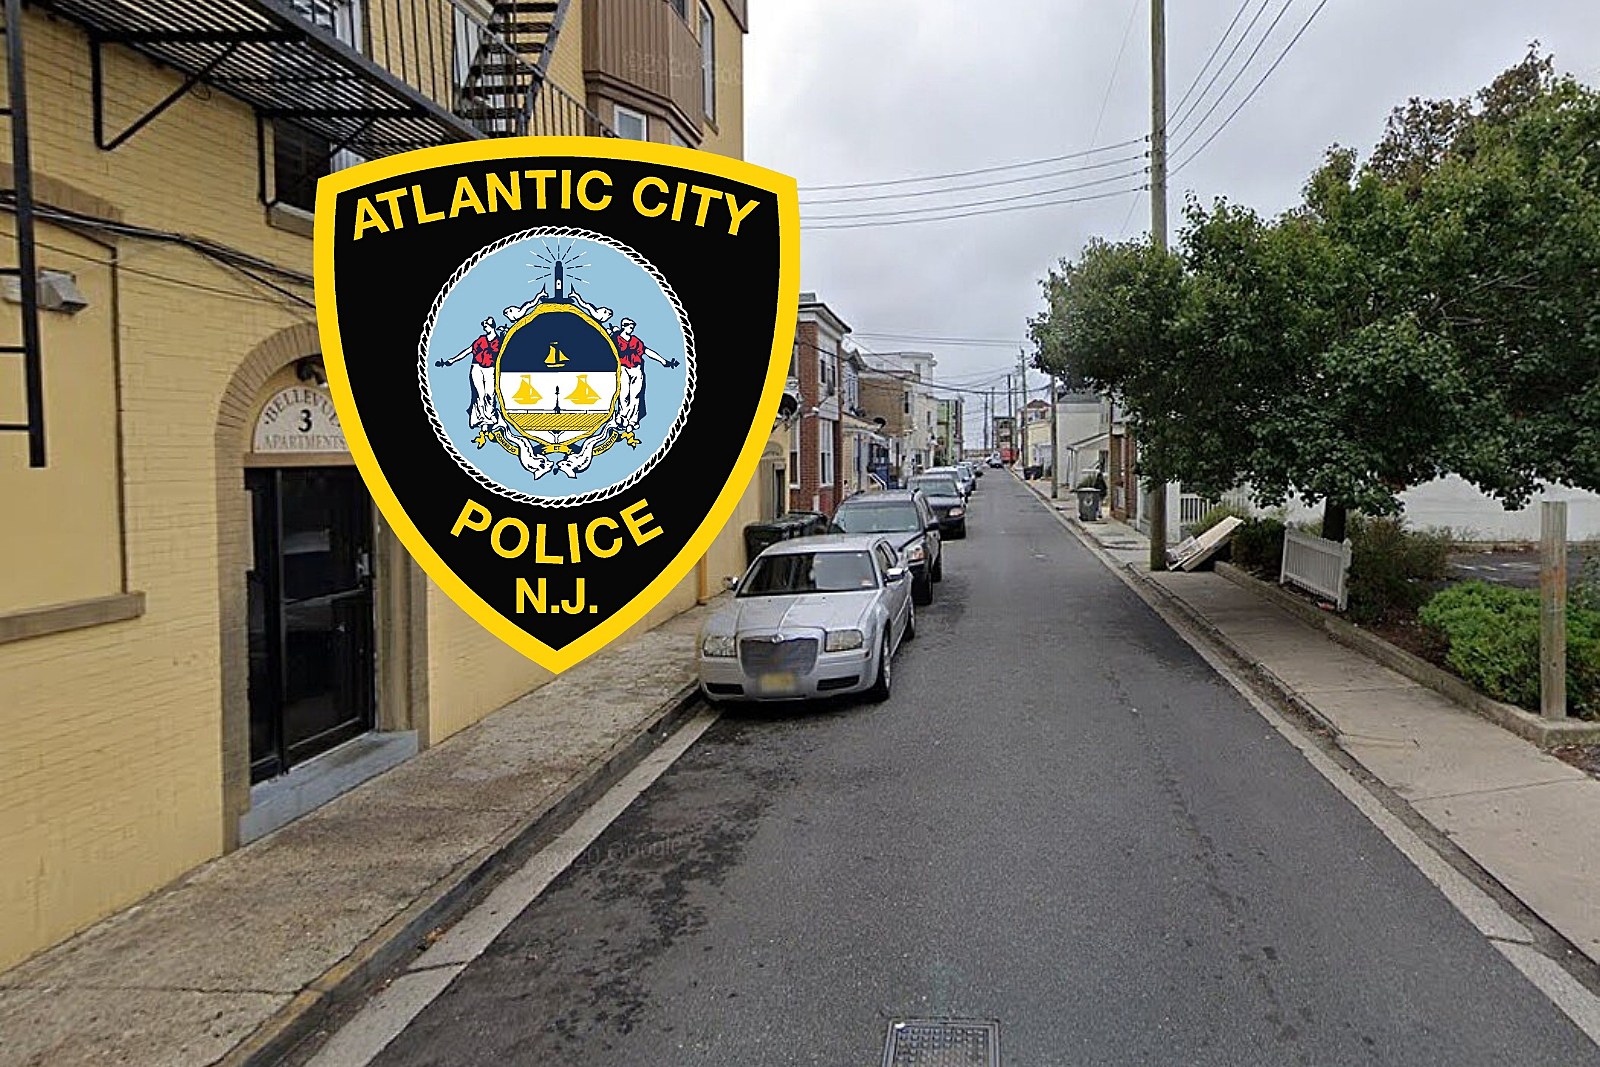 'Nuisance' Vehicle Leads to 2 Arrests, Drugs in Atlantic City,